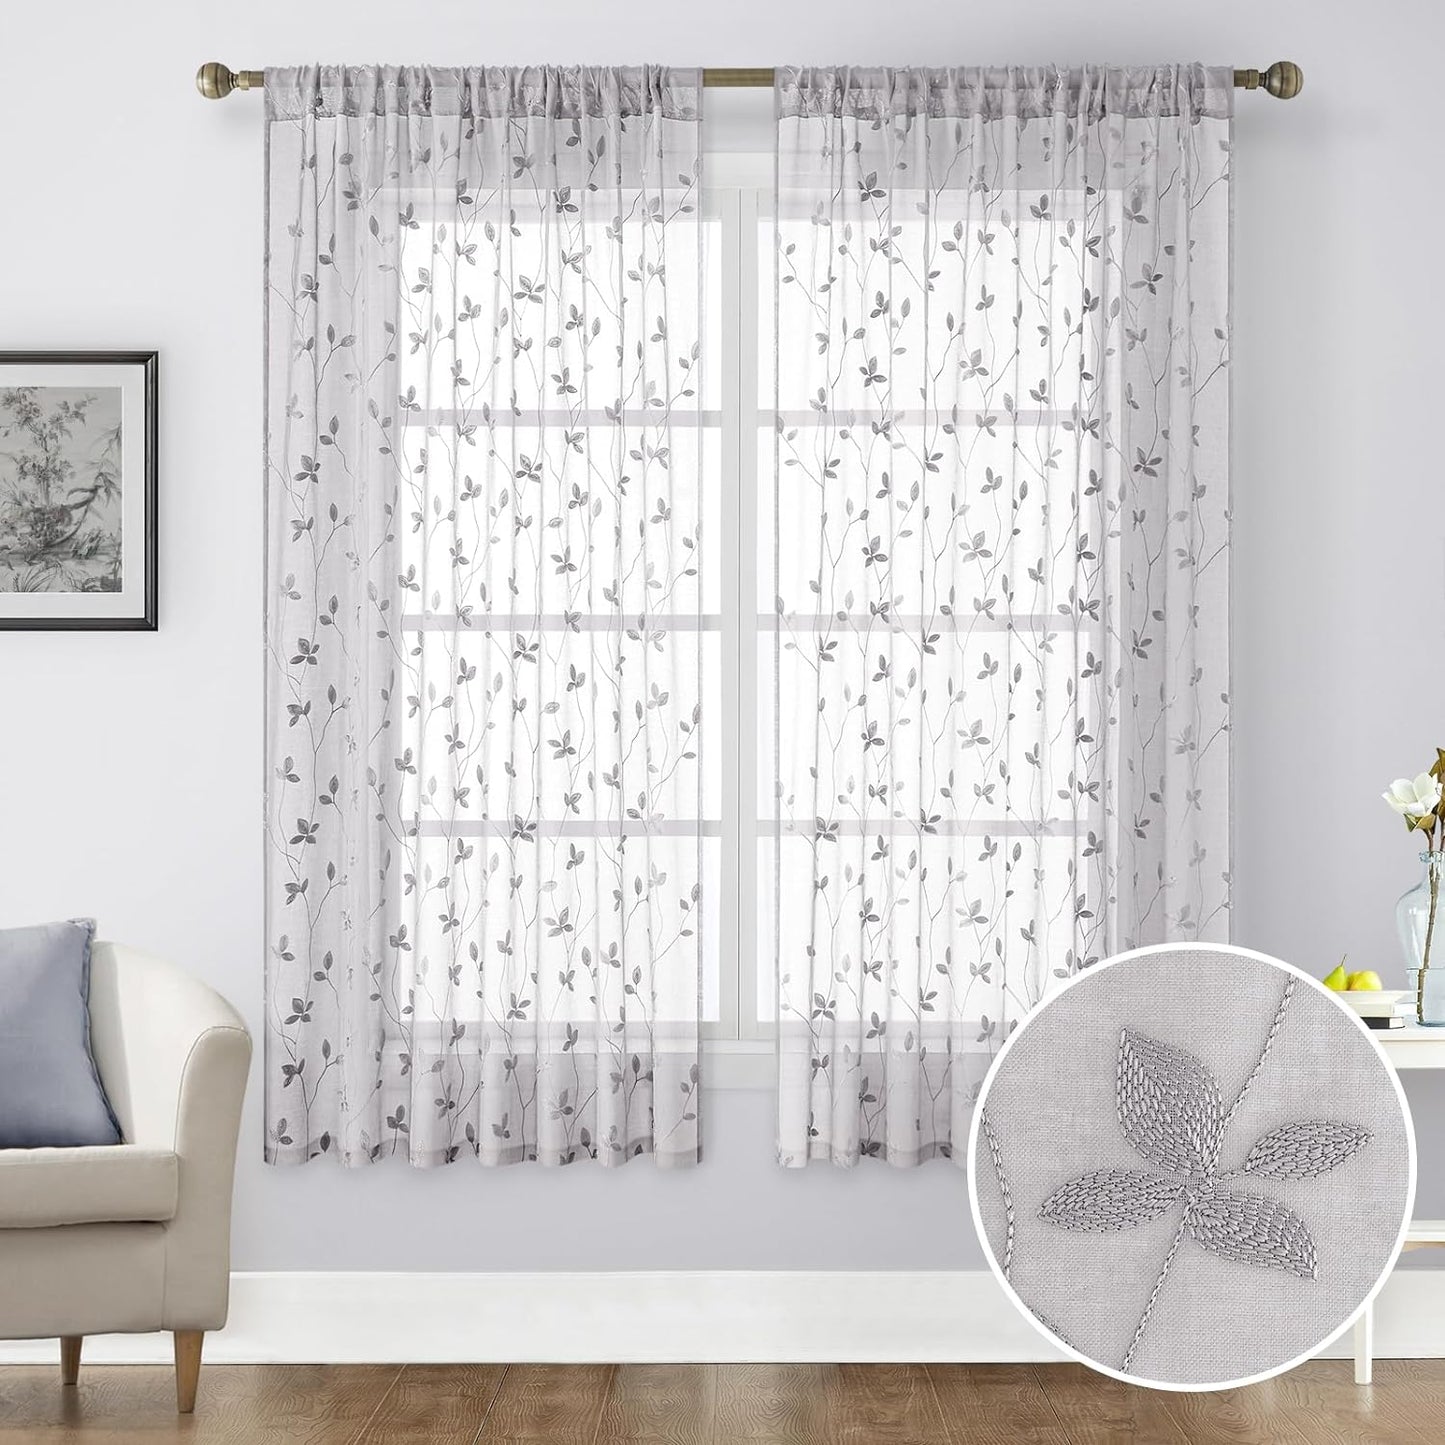 HOMEIDEAS Sage Green Sheer Curtains 52 X 63 Inches Length 2 Panels Embroidered Leaf Pattern Pocket Faux Linen Floral Semi Sheer Voile Window Curtains/Drapes for Bedroom Living Room  HOMEIDEAS Vine Light Grey W52" X L63" 